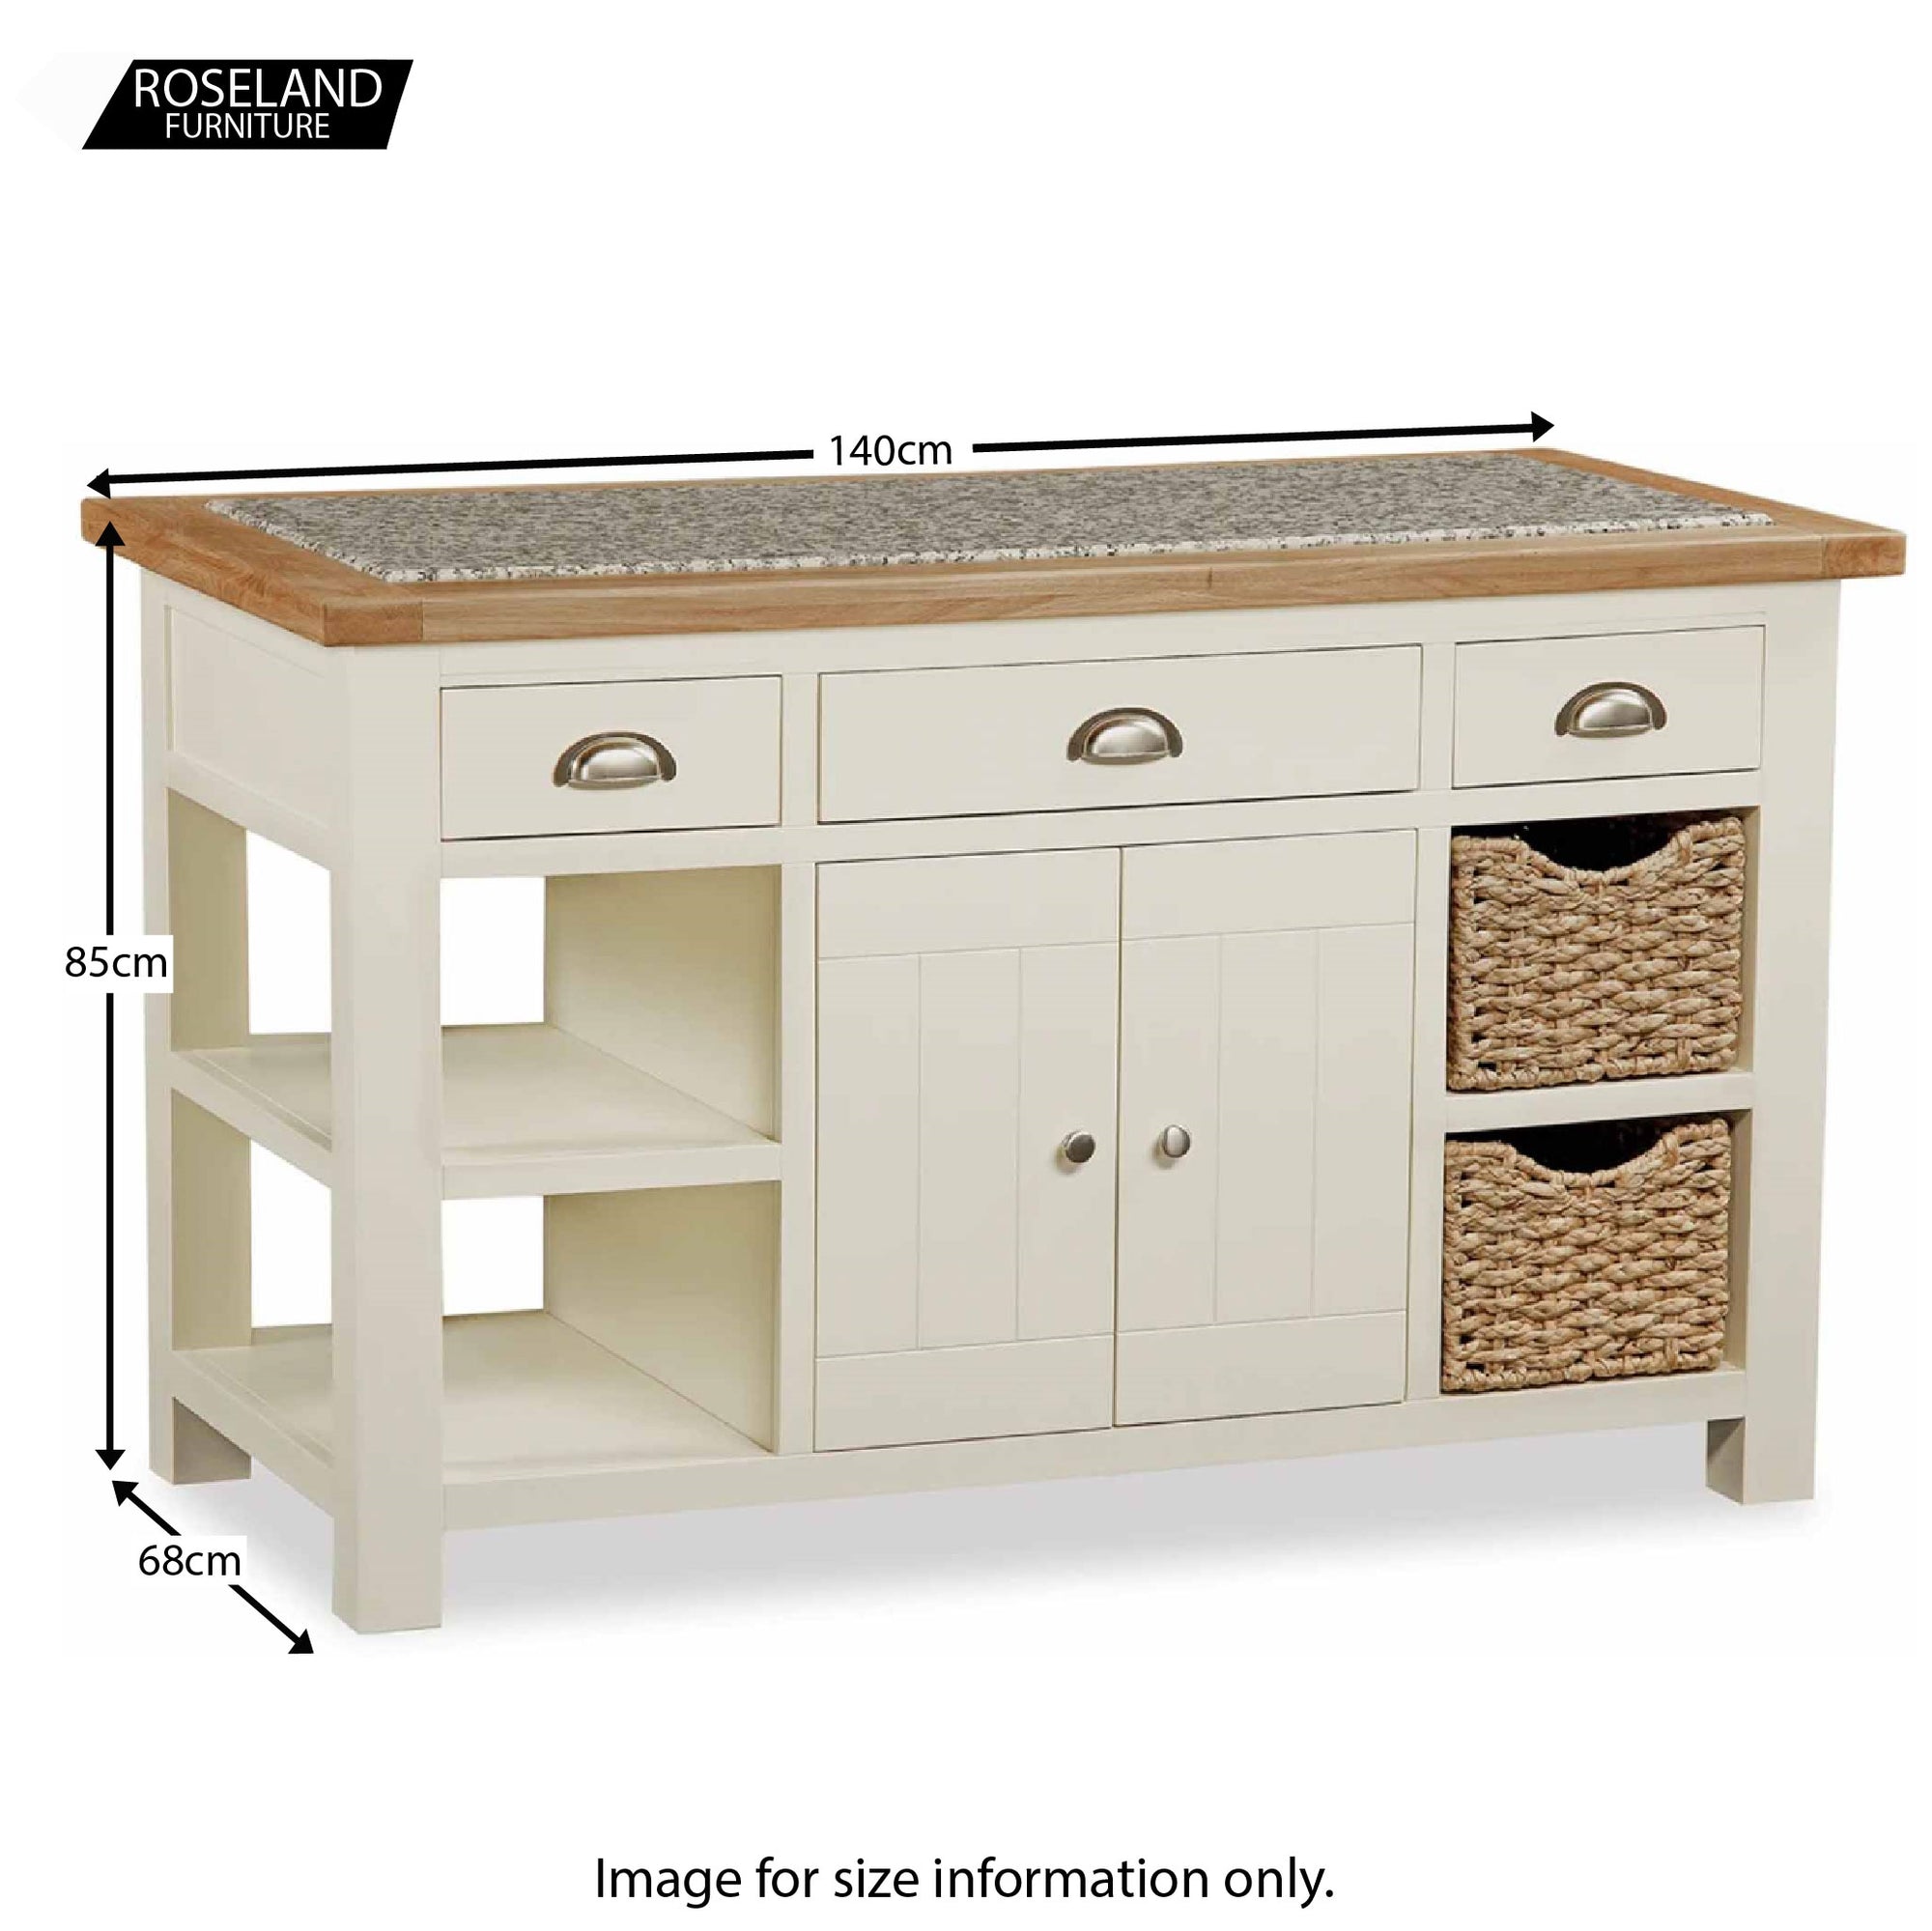 Daymer Cream Painted Kitchen Island With Oak Granite Top Roseland Furniture